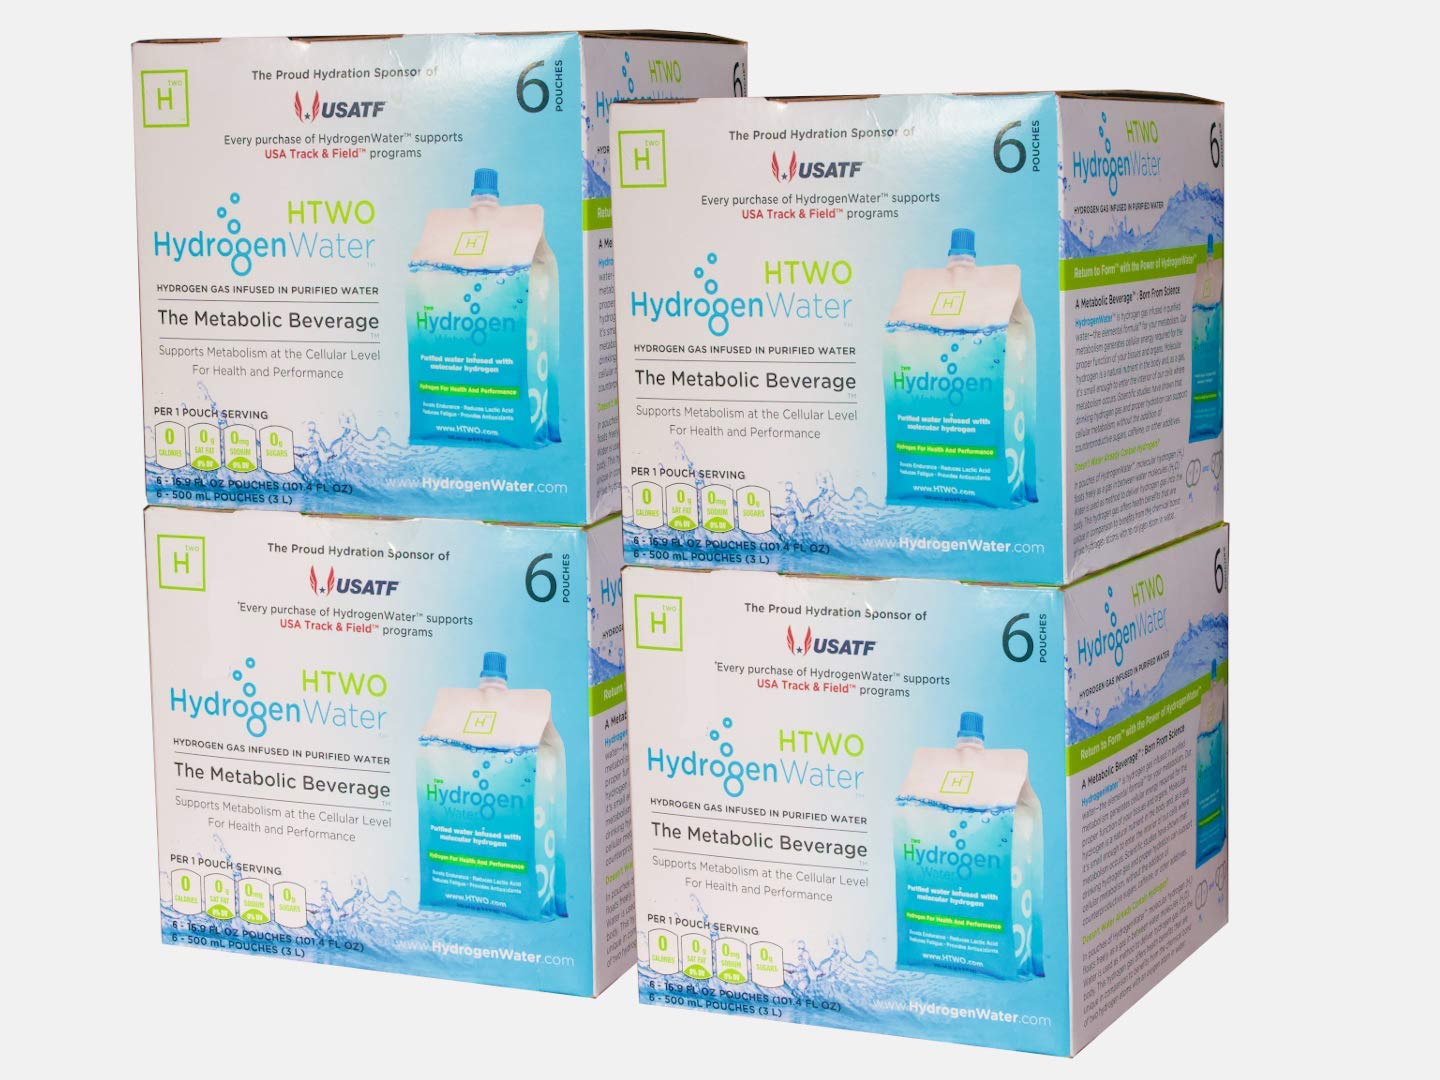 HTWO Hydrogen Water 4x 6 Pack 24 Pouches Total Molecular Hydrogen Gas Infused in Purified Water The Metabolic Beverage